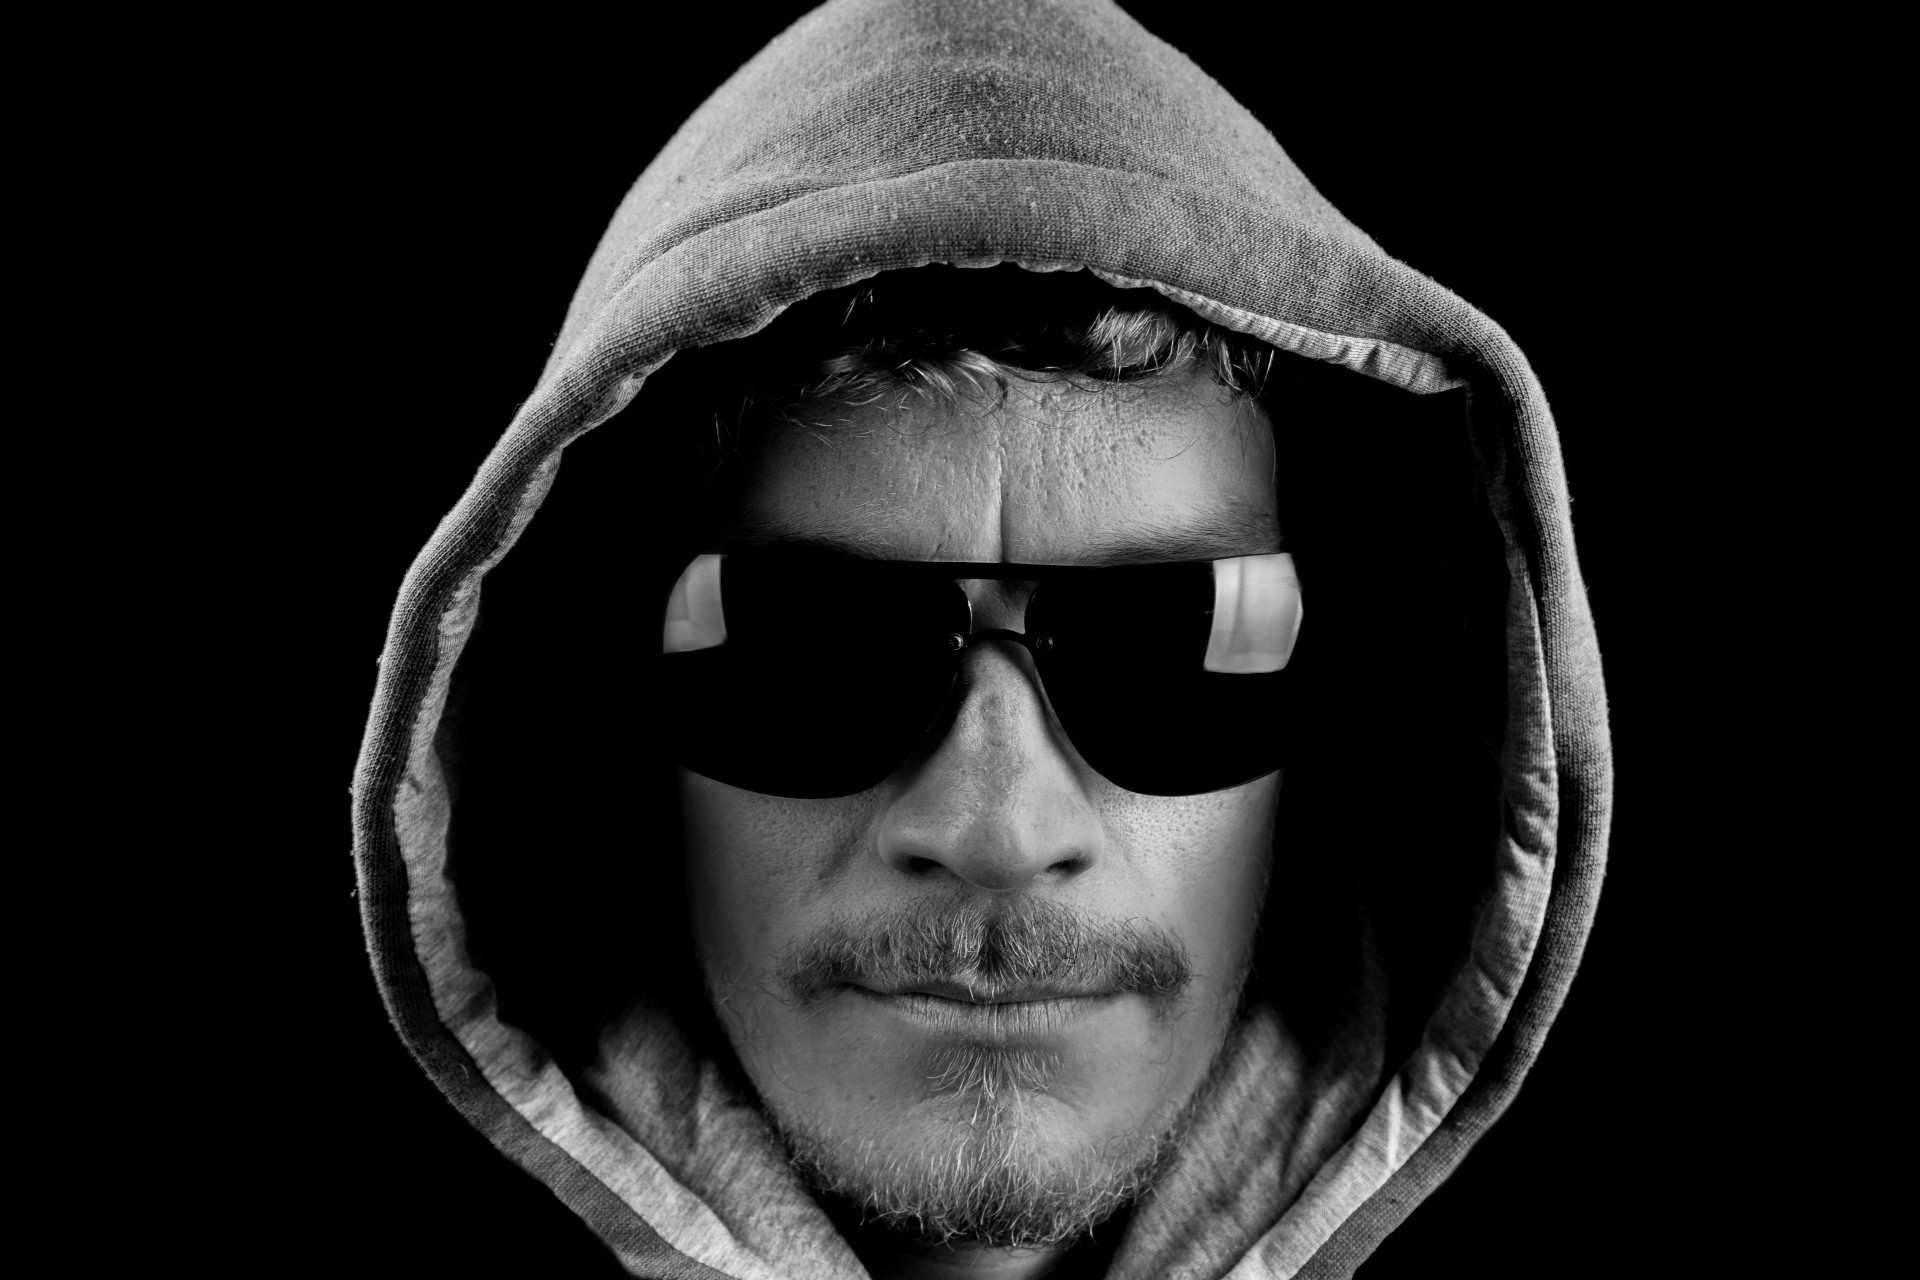 https://www.publicdomainpictures.net/pictures/100000/velka/man-with-hoodie-and-sunglasses.jpg